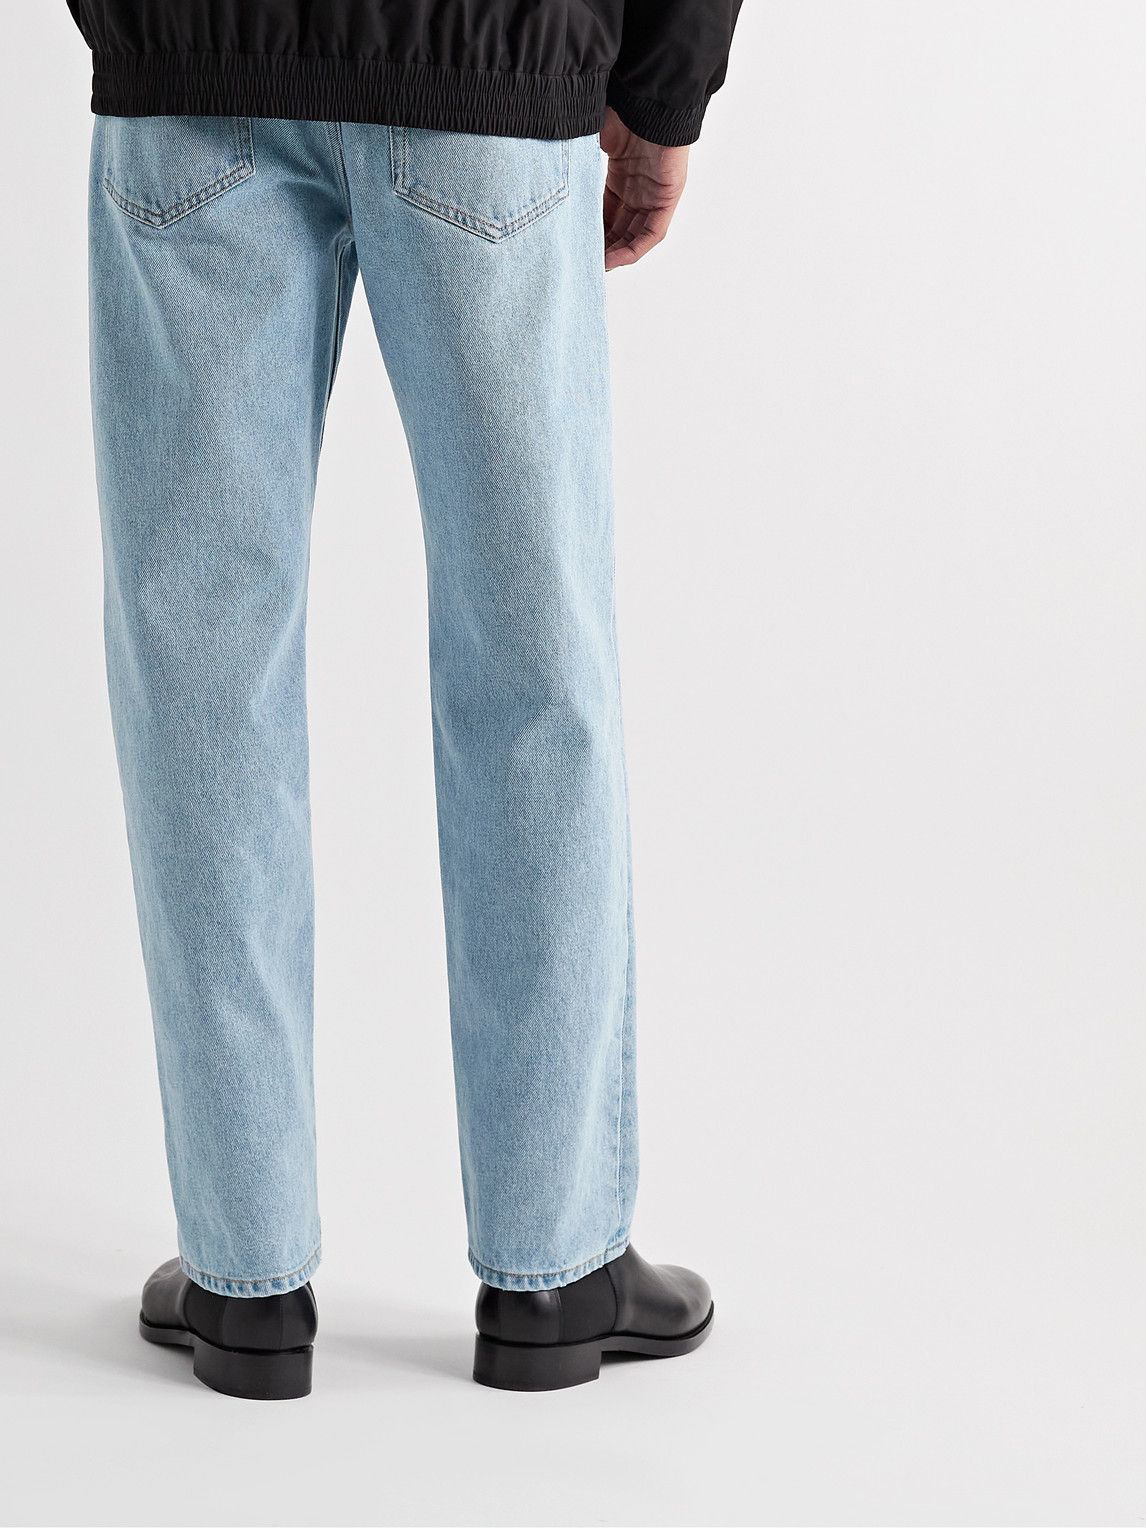 Denim Morton relaxed-fit jeans, The Row